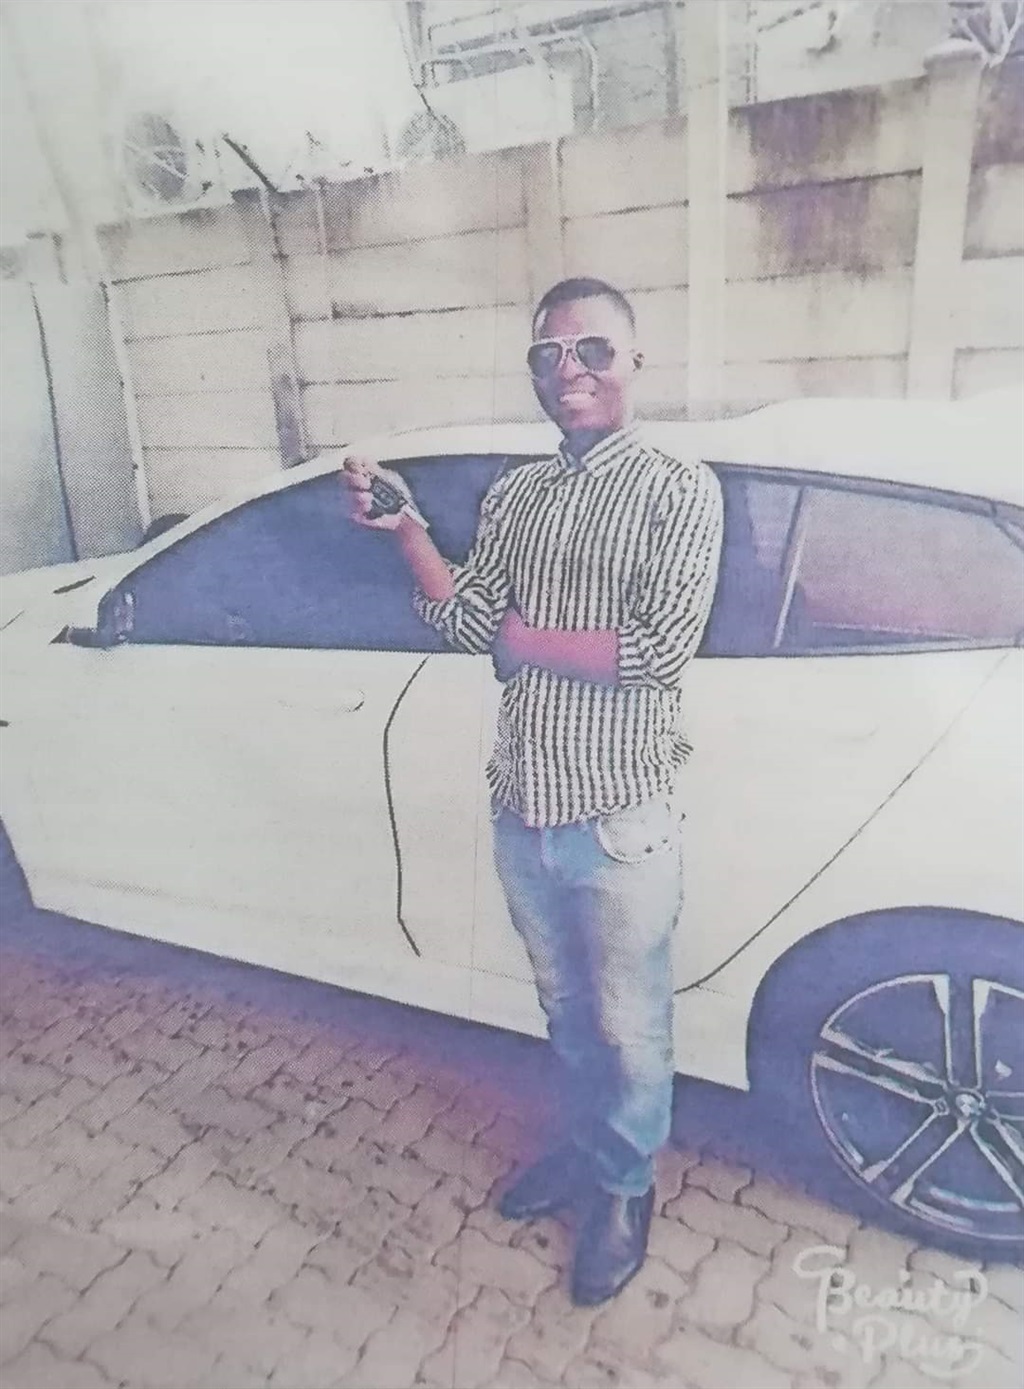 Mthokozisi Mbatha said he is certain that the body found is that of his sibling, Sibusiso Mbatha (picture), who had been missing since  3 December. 